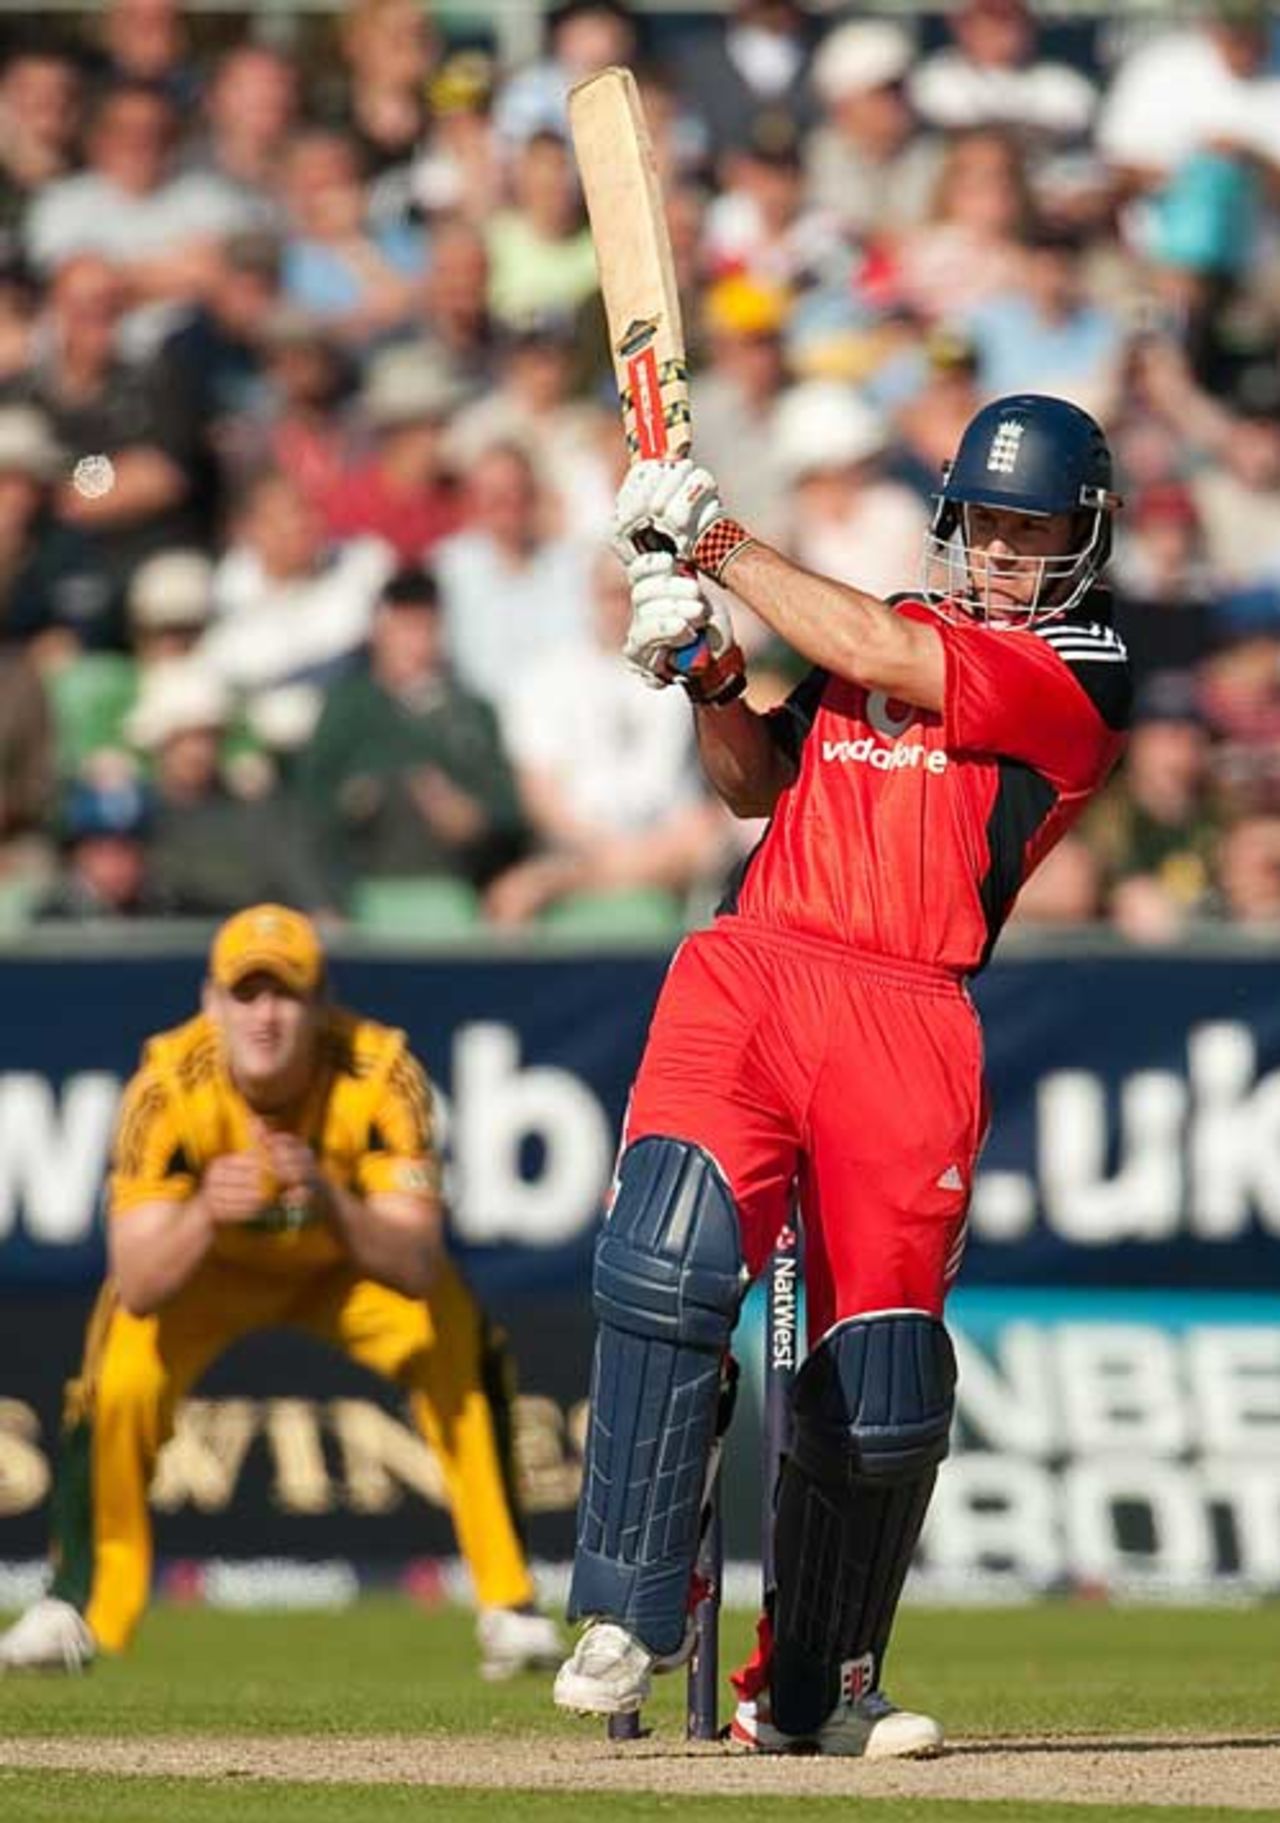 Andrew Strauss continued his consistent form with 47, England v Australia, 7th ODI, Chester-le-Street, September 20, 2009